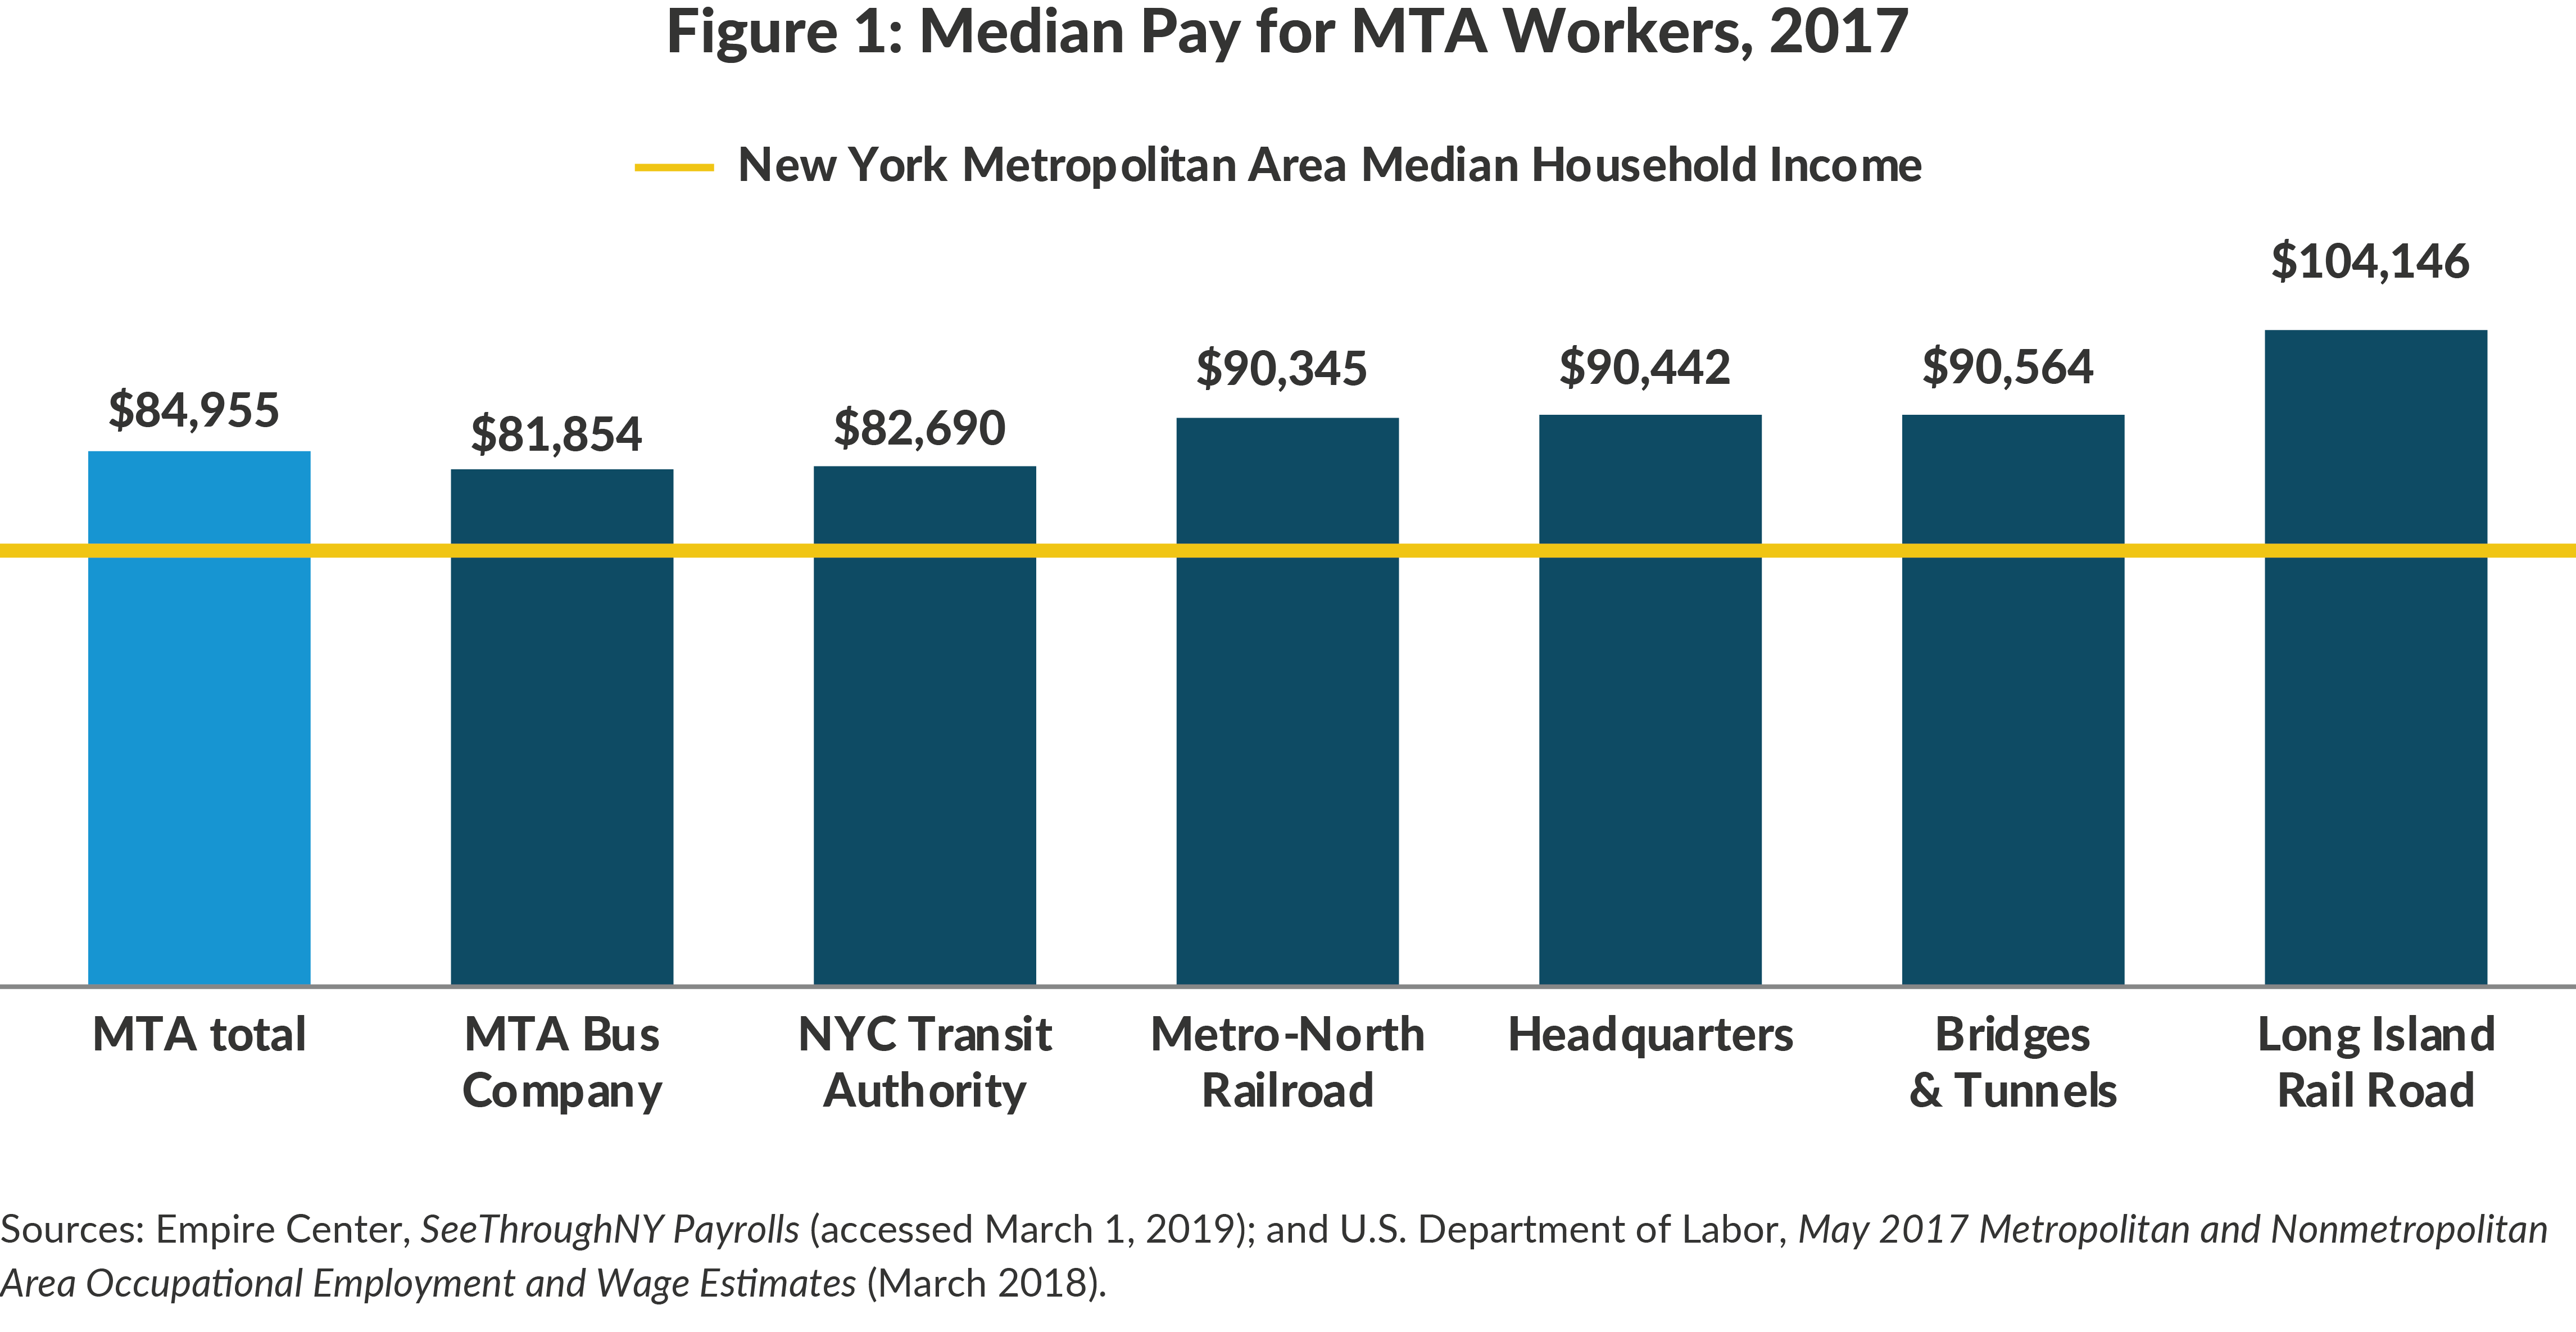 Figure 1: Median Pay for Metropolitan Transportation Authority Workers, 2017